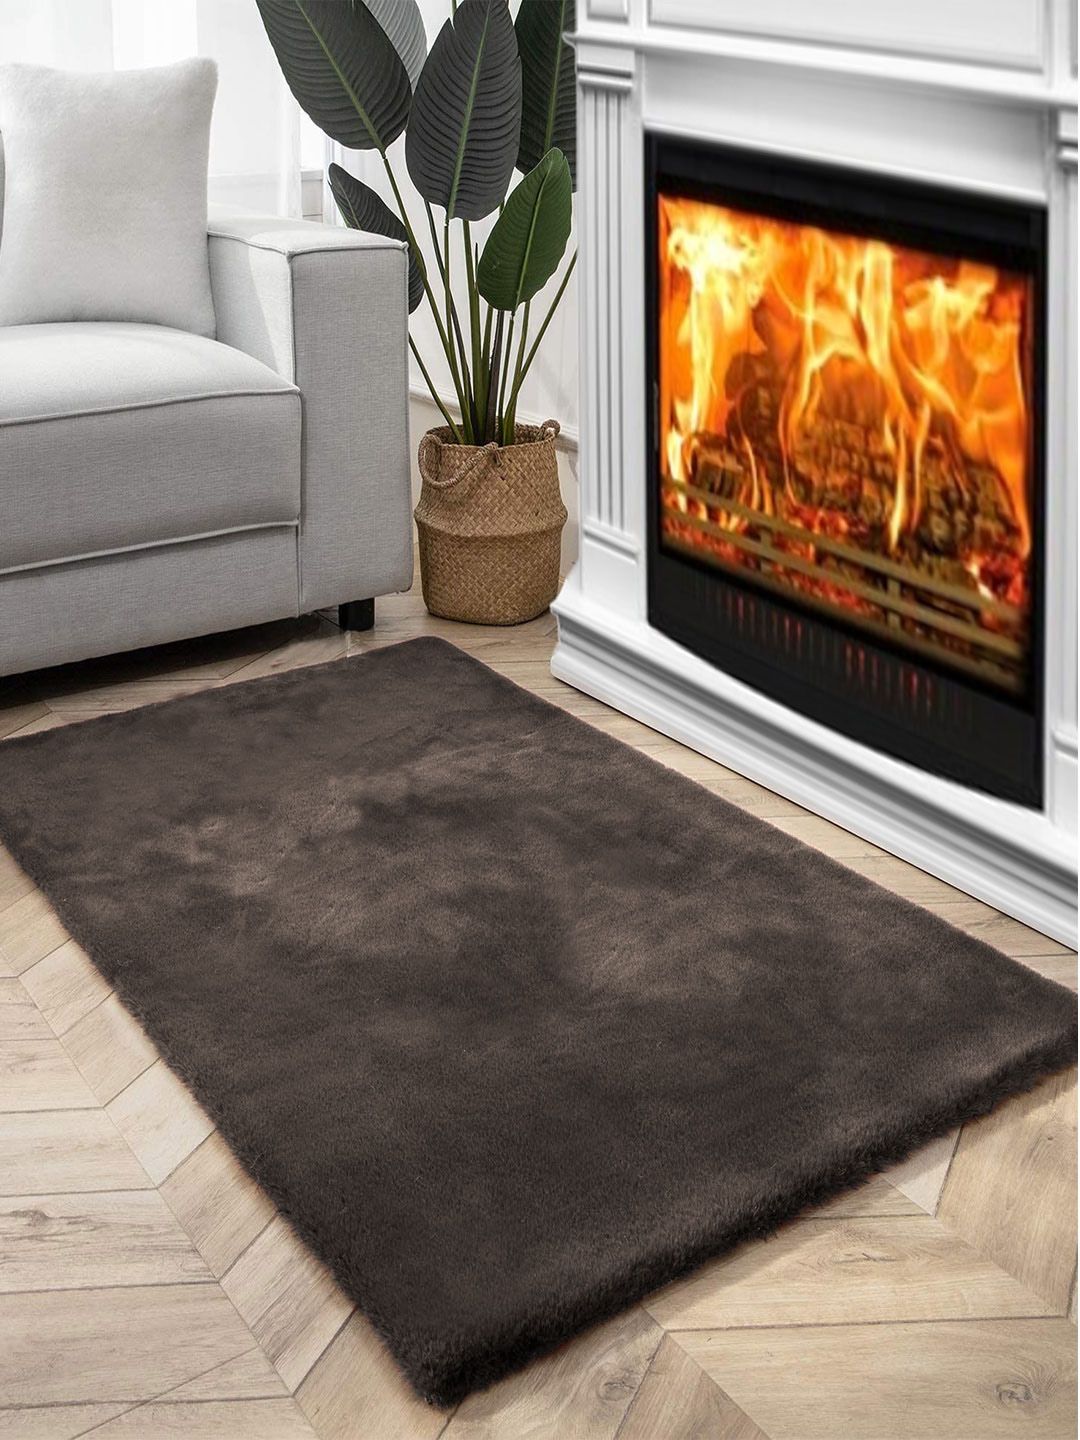 FI Coffee Brown Polycotton Solid Bath Rugs Price in India